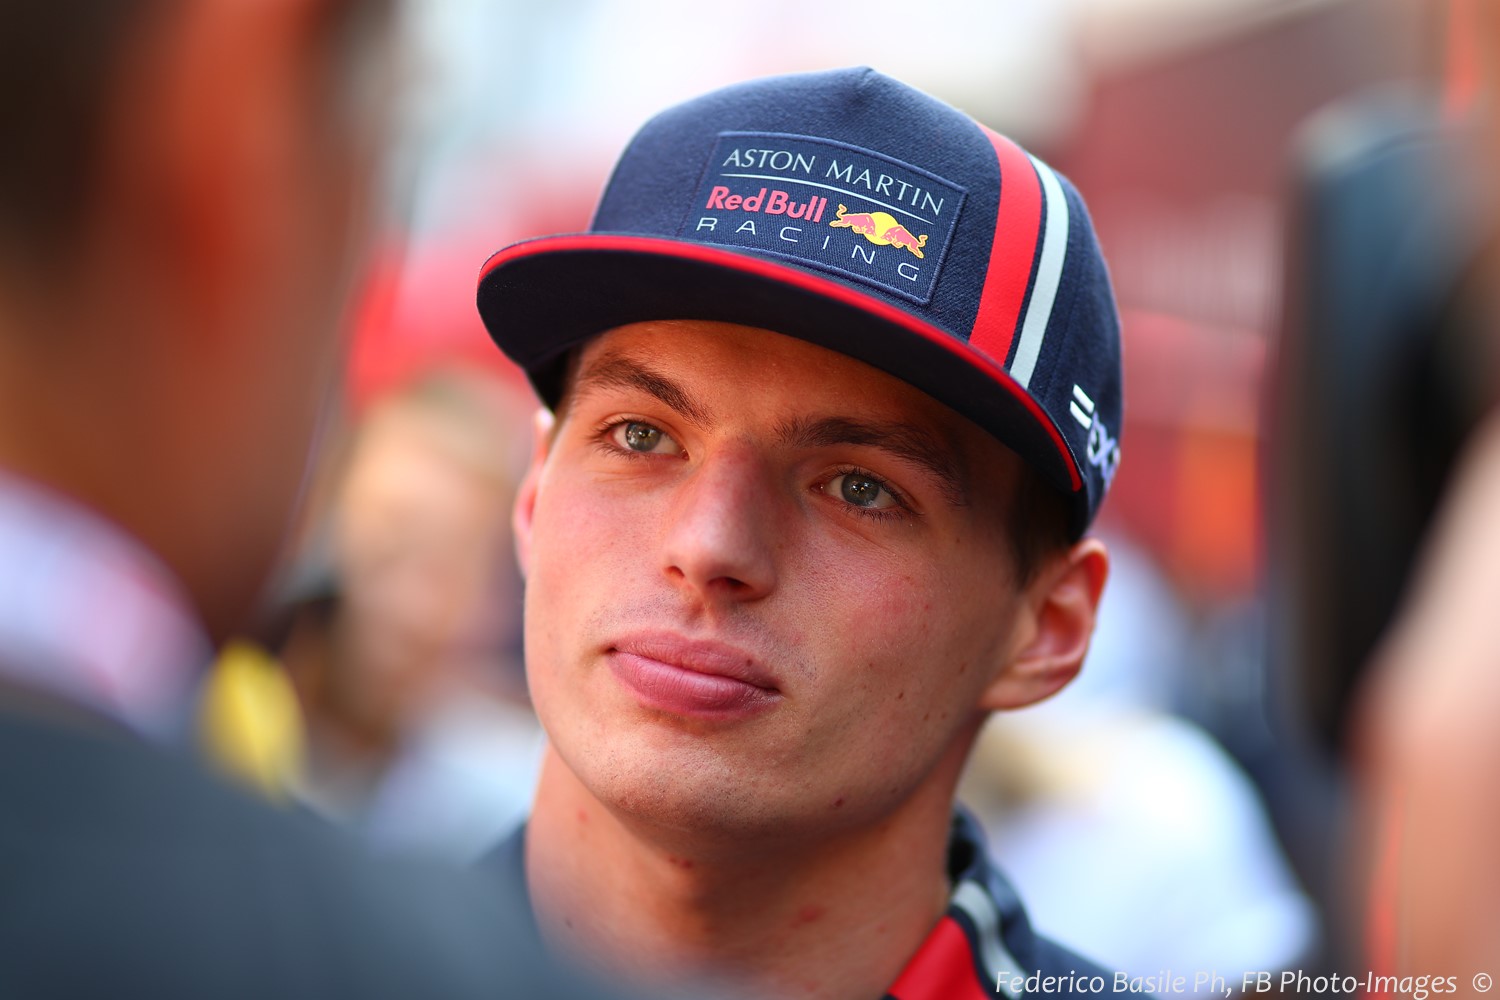 Max Verstappen knows any driver can win 5 titles in the Mercedes